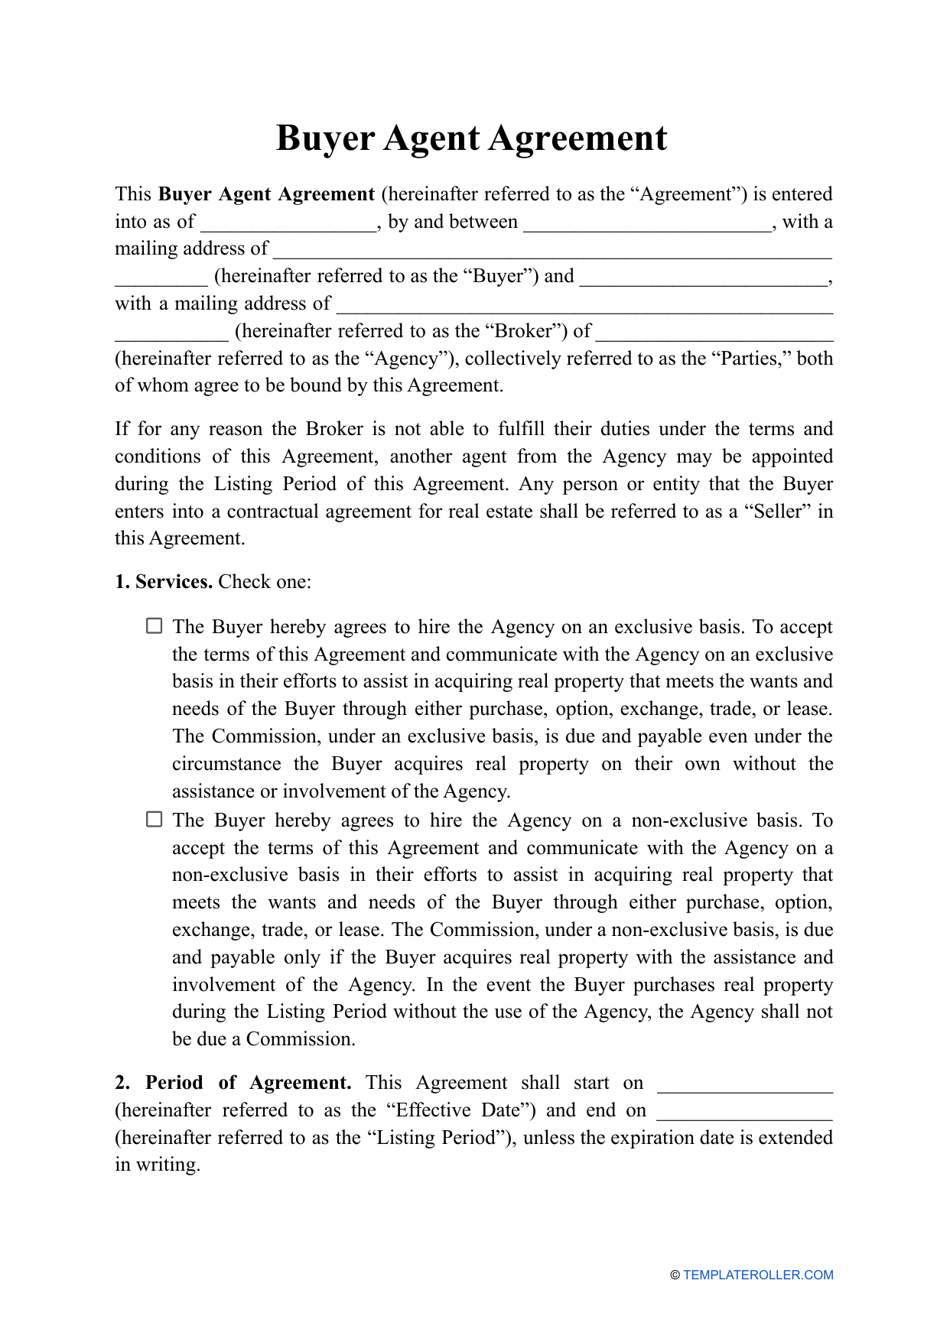 Buyer Agent Agreement Template, Page 1